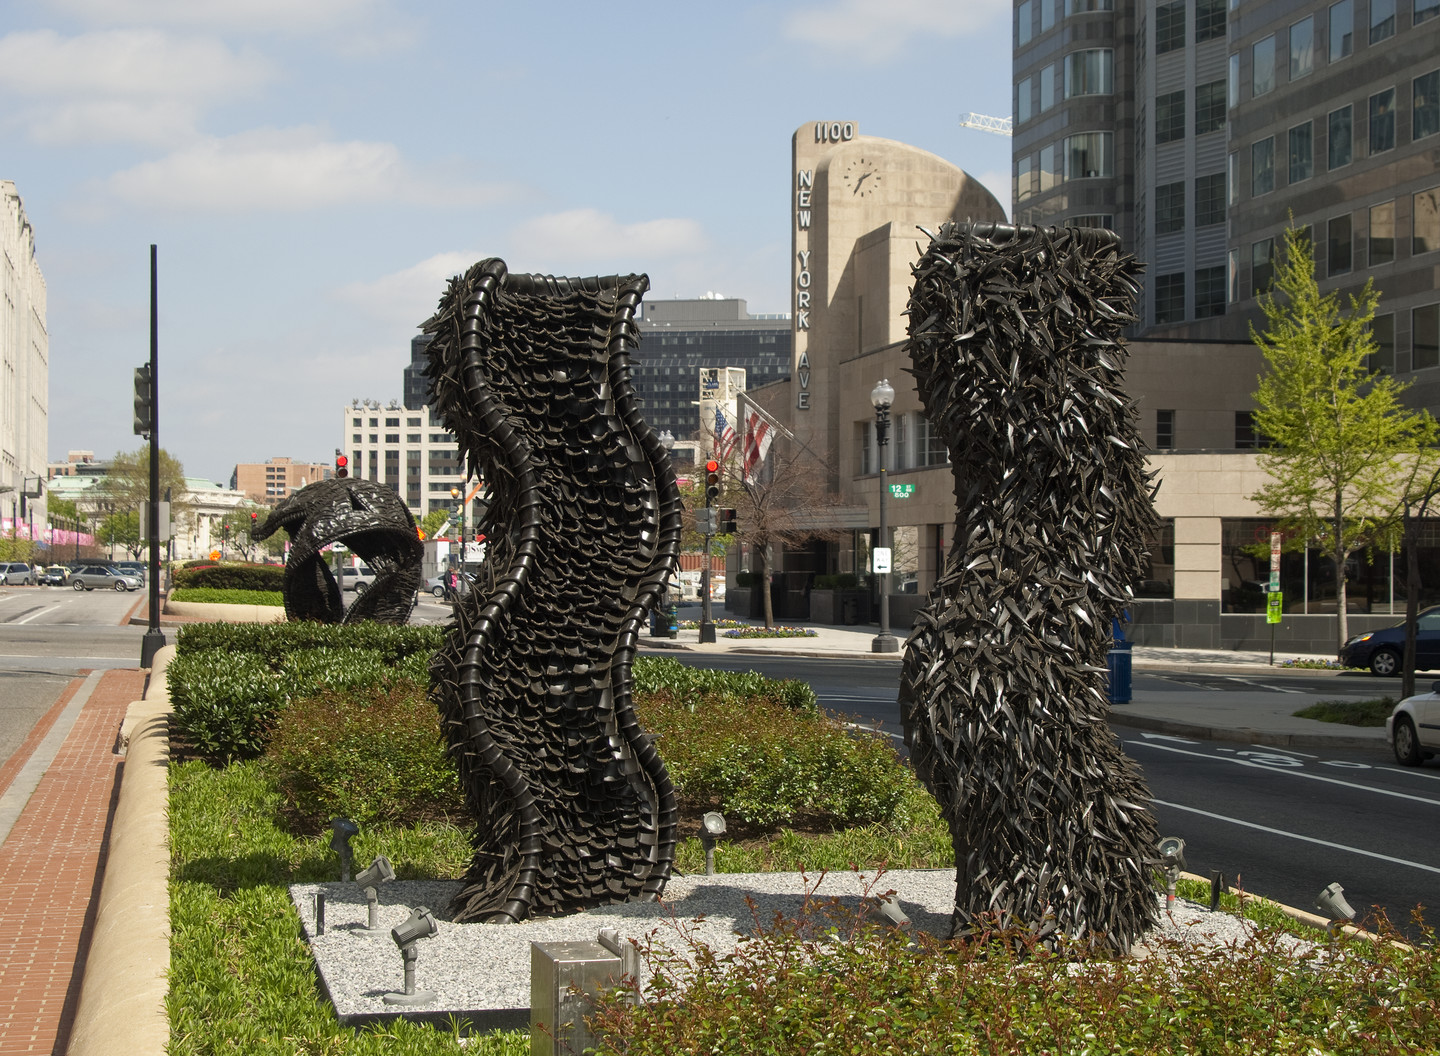 Two large abstract sculptures made from tires rise from a center median in a city street. The sculptures are wavy columns.